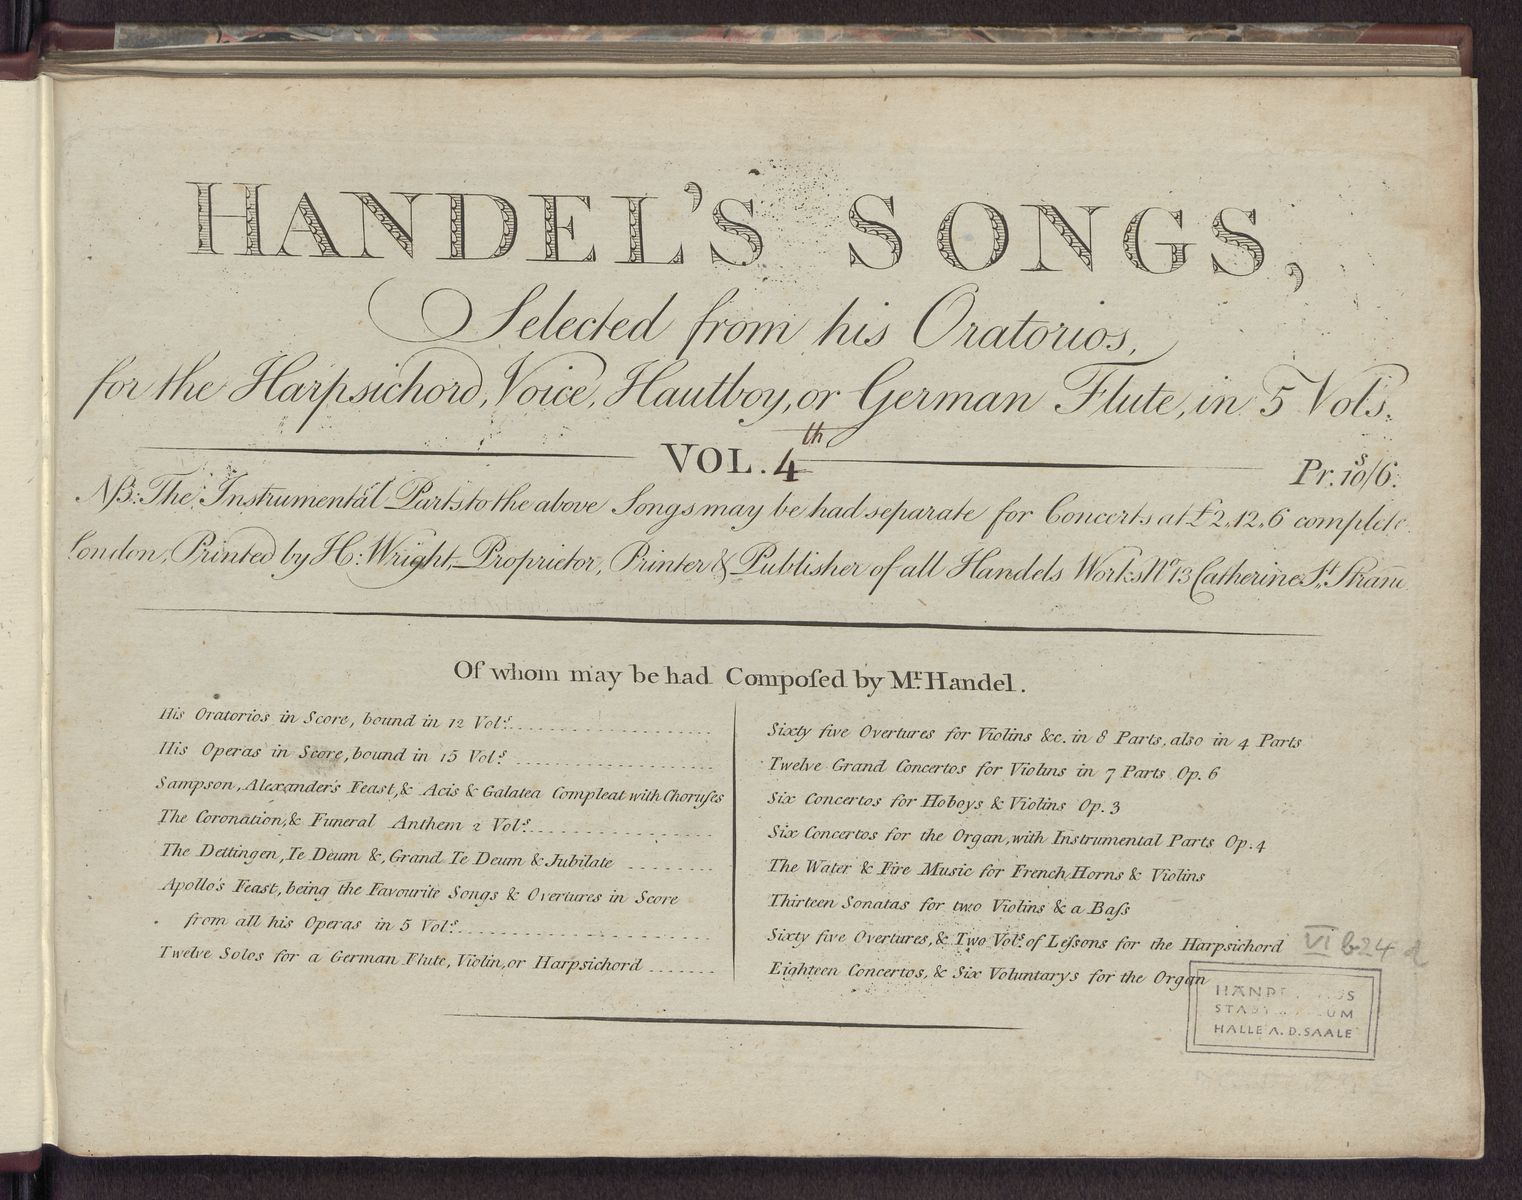 Handel’s Songs Selected from his Oratorios : for the Harpsichord, Voice, Hautboy, or German Flute ... ; Vol. 4, Abbildung 8 (Stiftung Händel-Haus Halle CC BY-NC-SA)